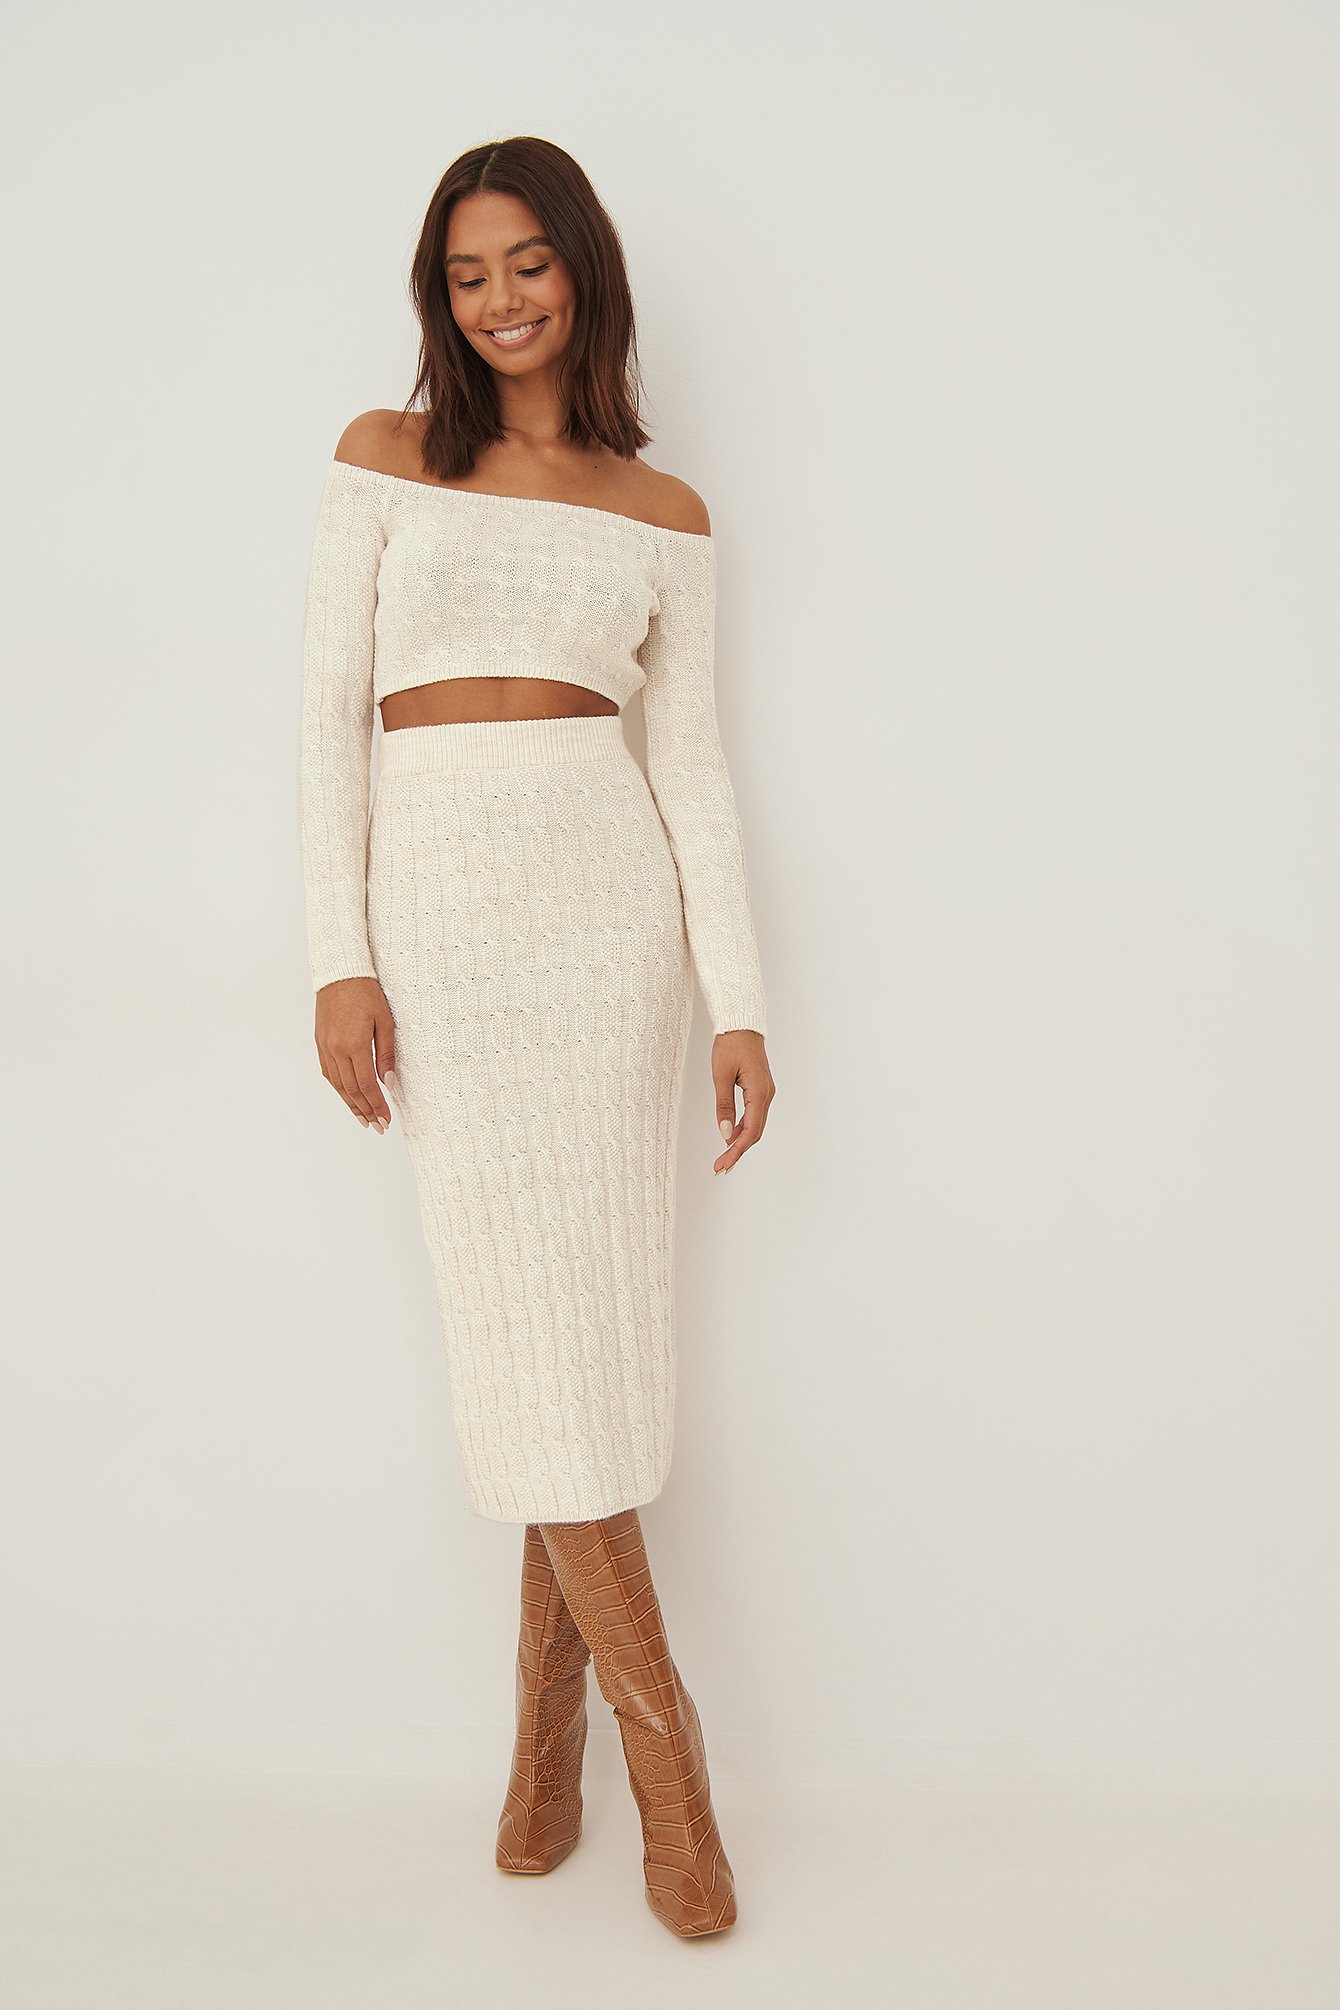 Knit Detail Midi Skirt Outfit